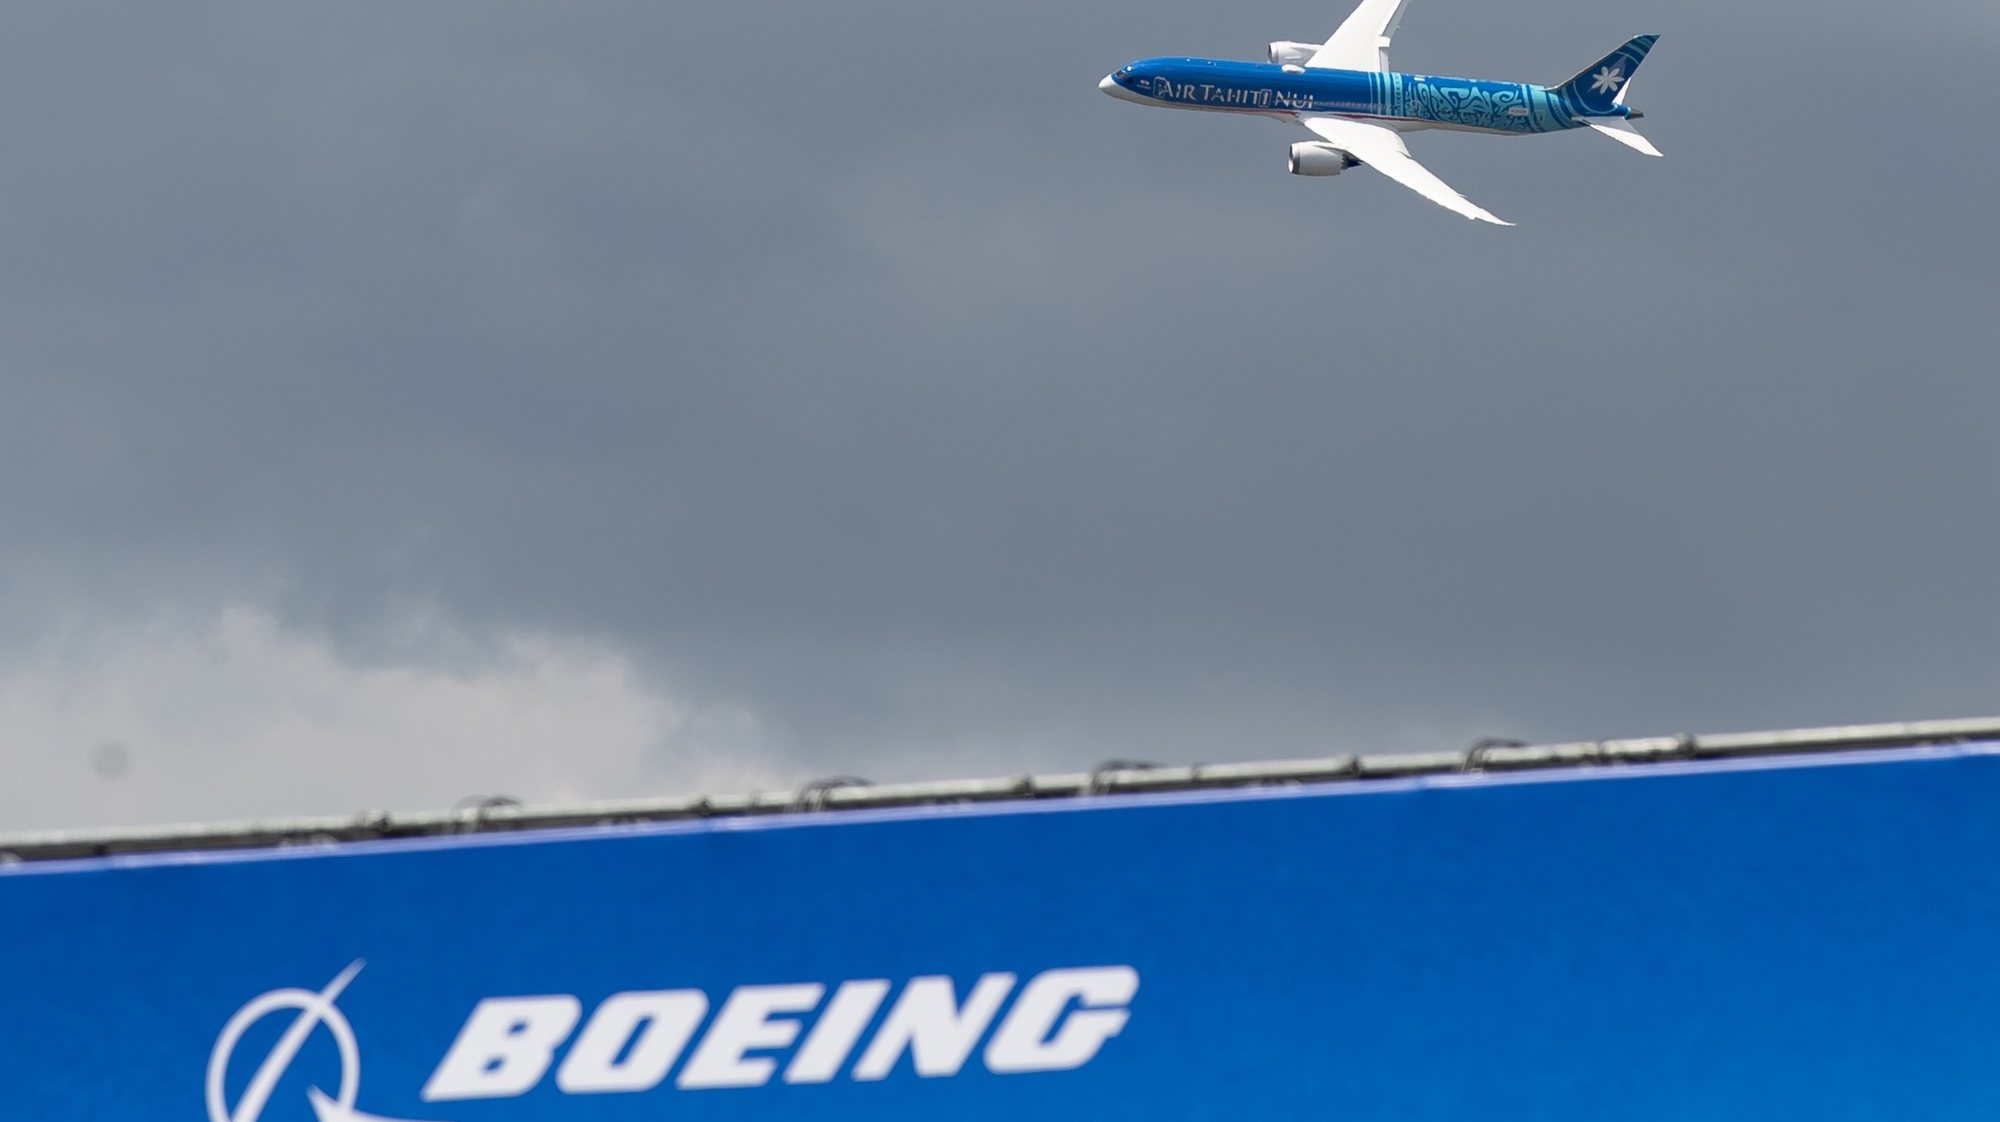 epa08780273 (FILE) - A Boeing 787-9 performs a demonstration flight during the opening day of the 53rd International Paris Air Show at Le Bourget Airport near Paris, France, 17 June 2019 (reissued 28 October 2020). Boeing on 28 October 2020 published their 3rd quarter 2020 results, saying their 3rd quarter 2020 revenue stood at 14,139 million USD, less 29 per cent from 2019 figures of 19,980, while first nine months revenue was 42,854 million USD, less 27 per cent from 2019 revenue of 58,648 million USD.  EPA/IAN LANGSDON *** Local Caption *** 55830720